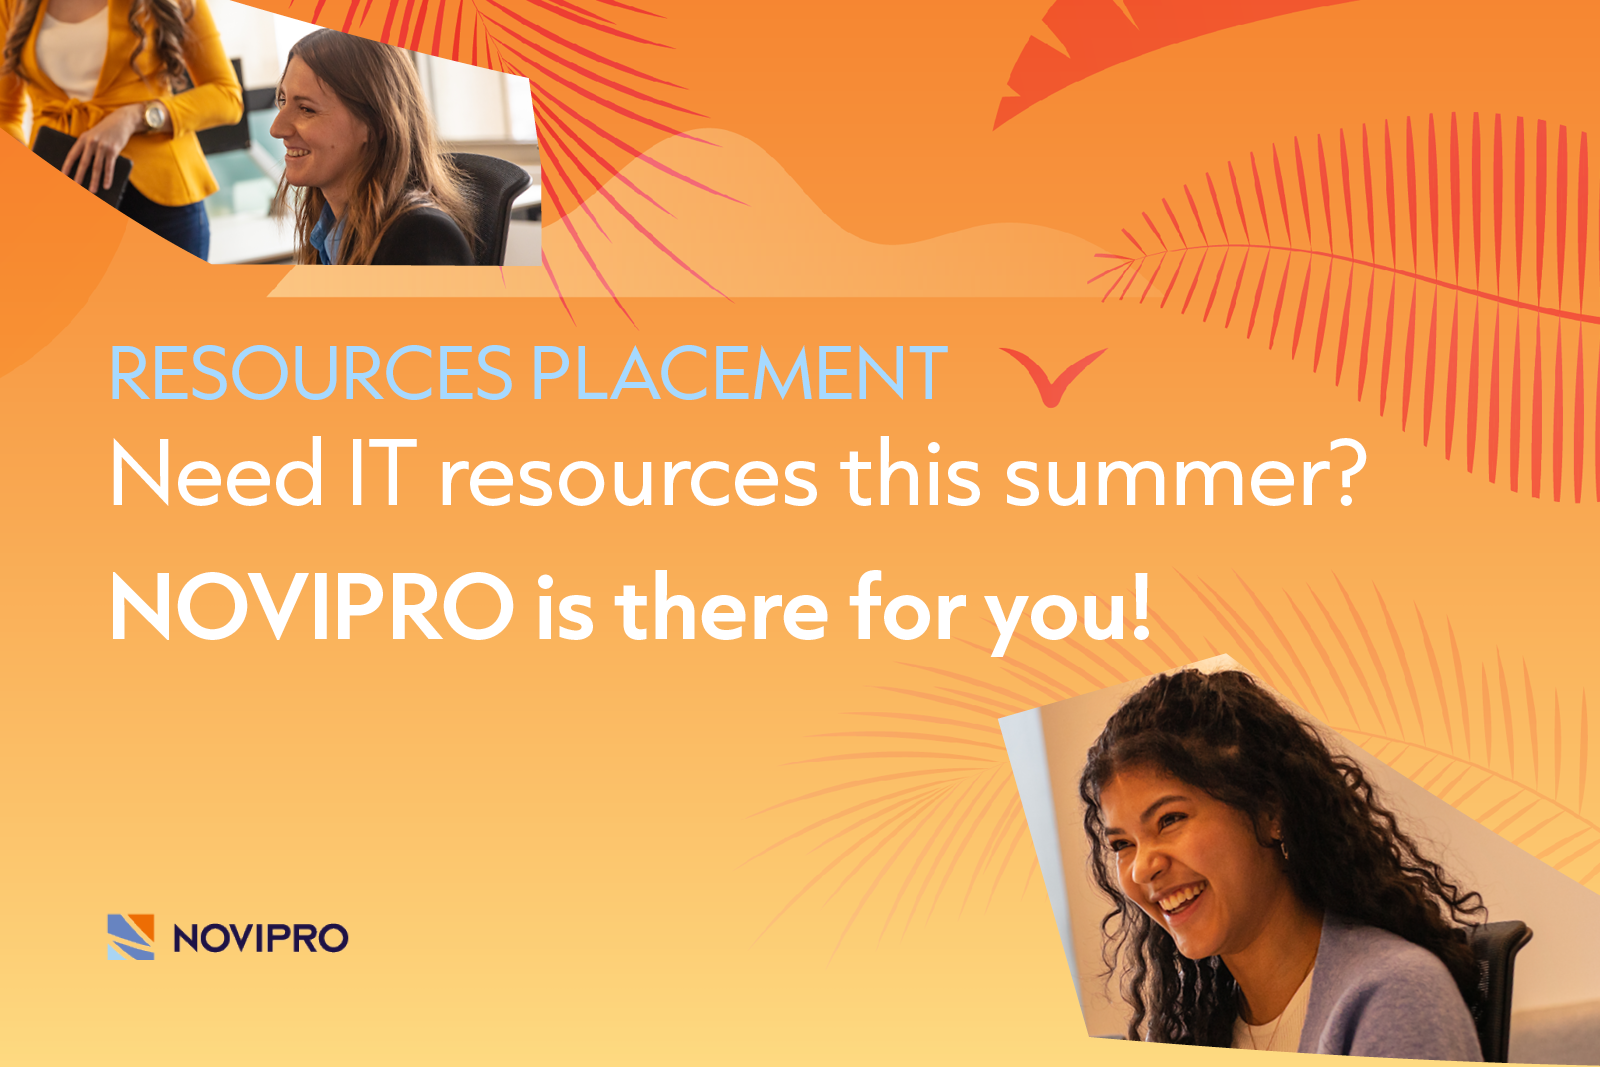 Need IT resources this summer? NOVIPRO is there for you!